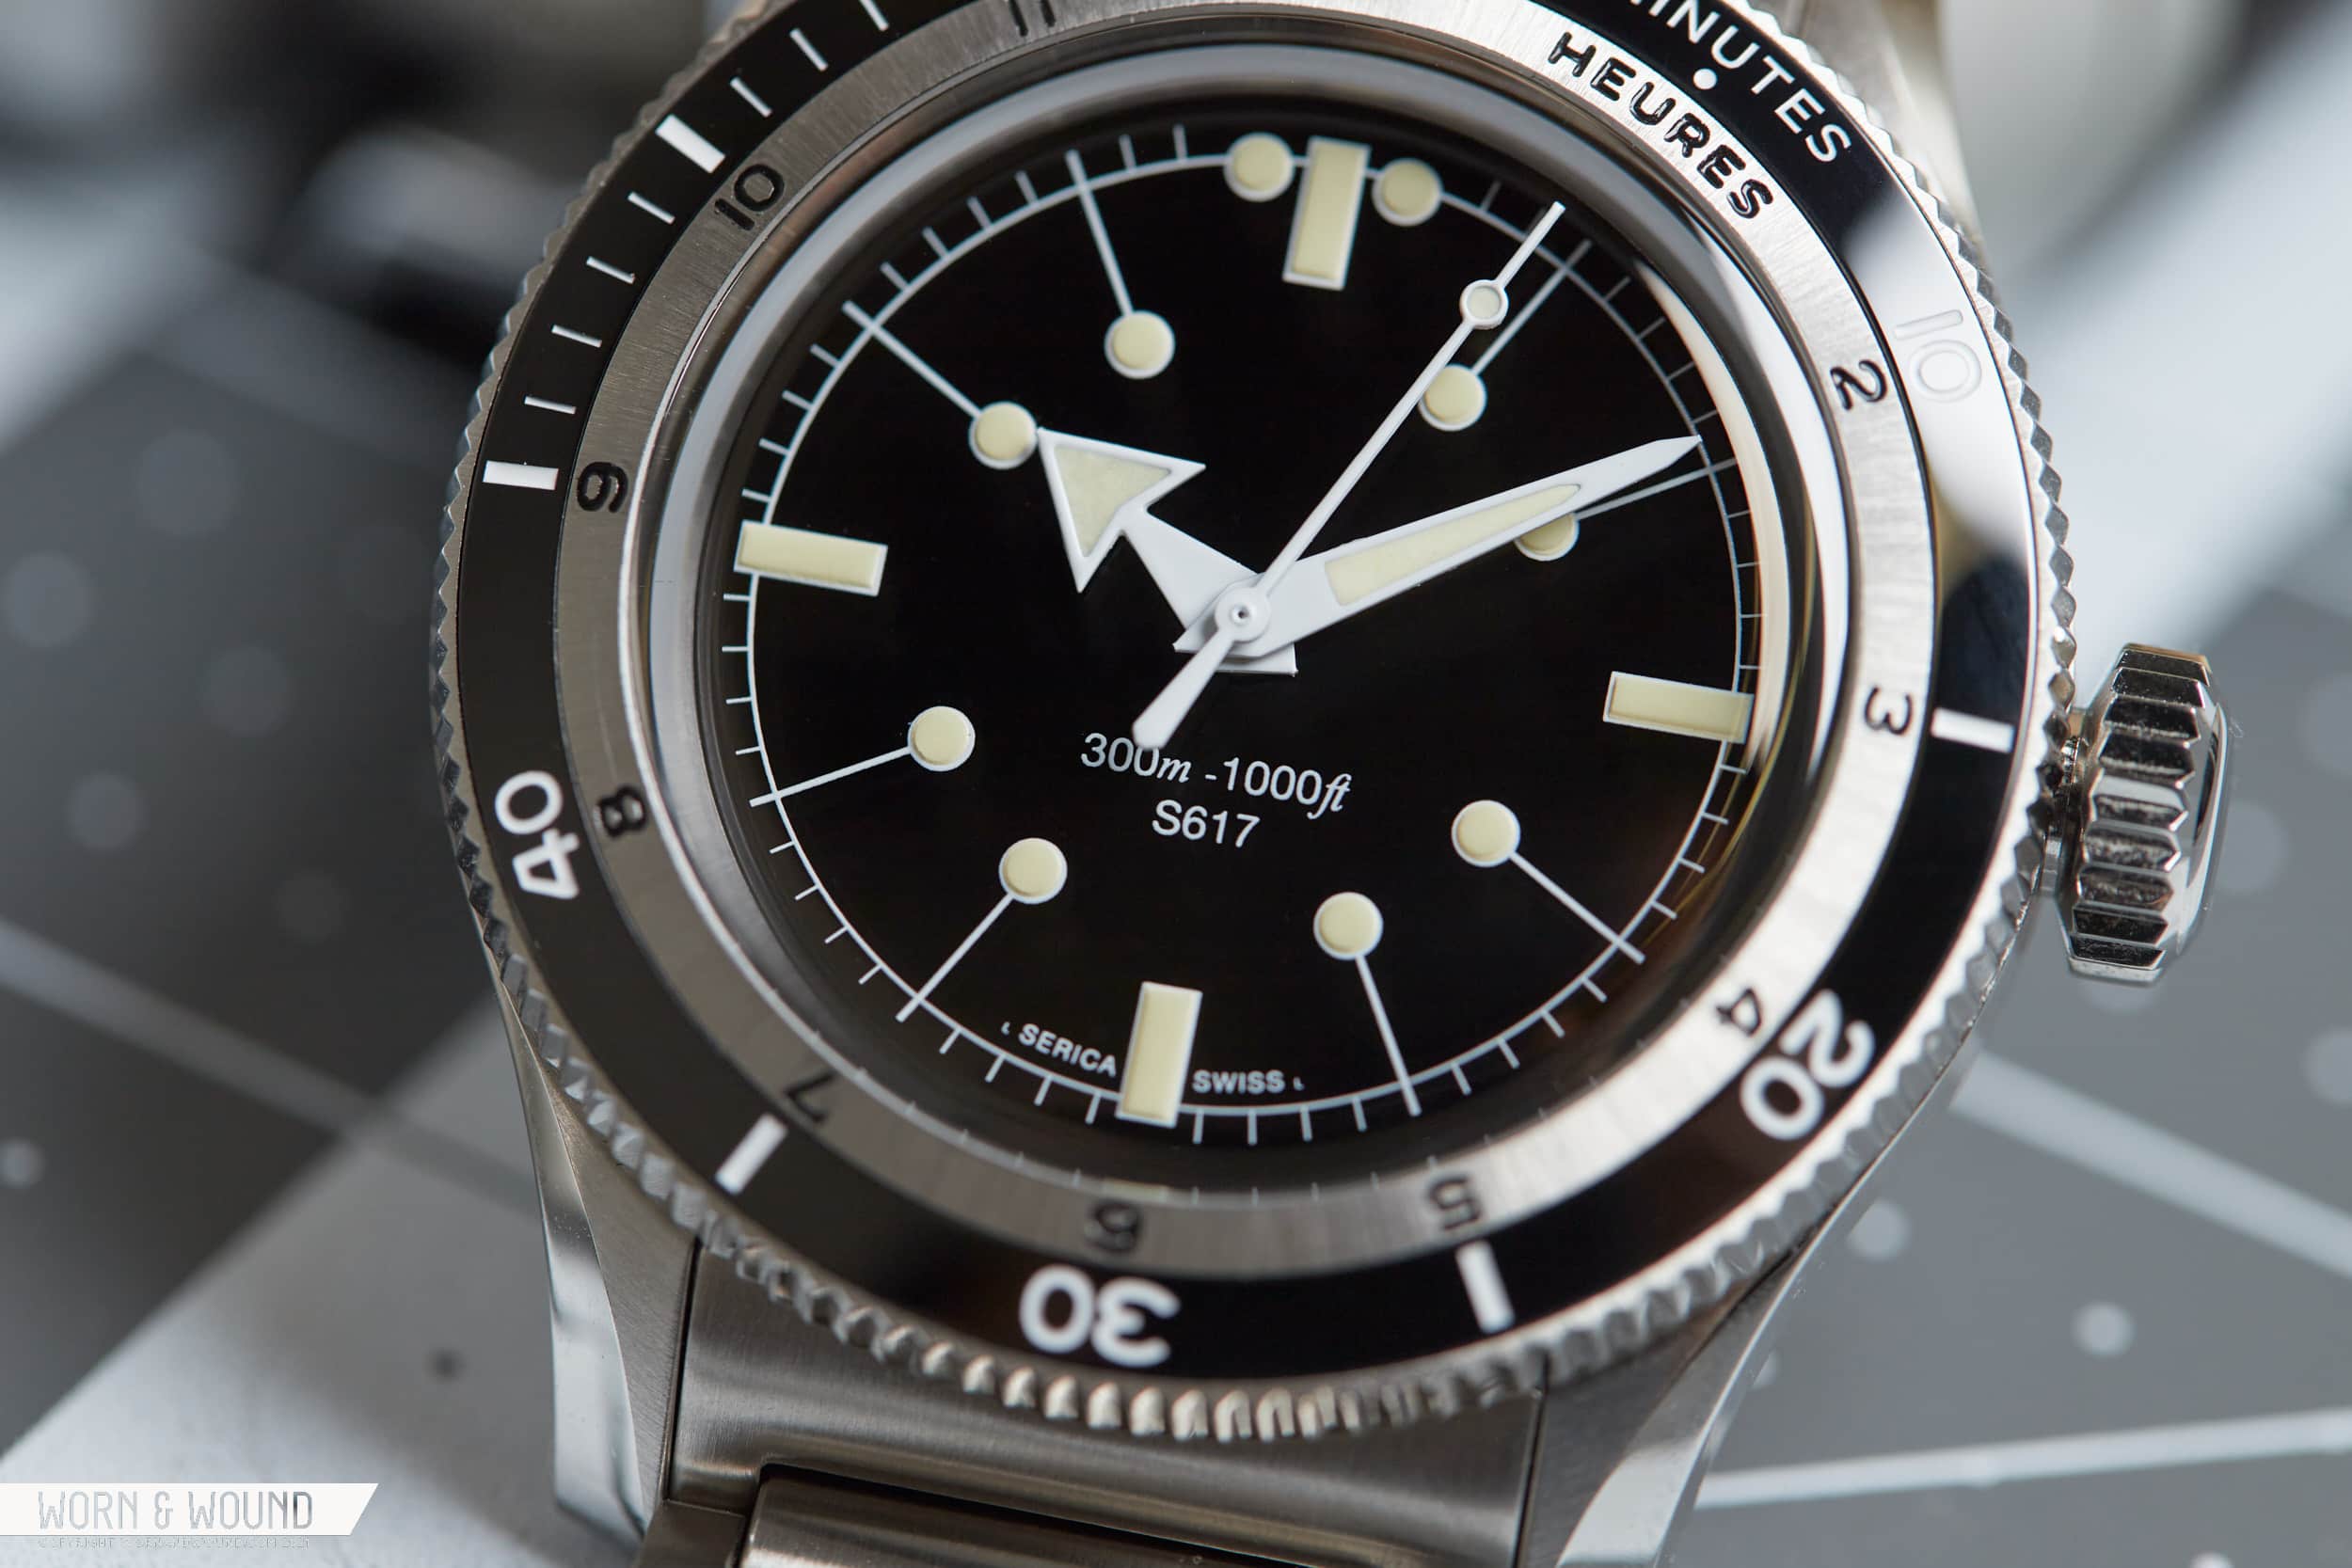 Review: the Serica 5303 Dive Watch - Worn & Wound